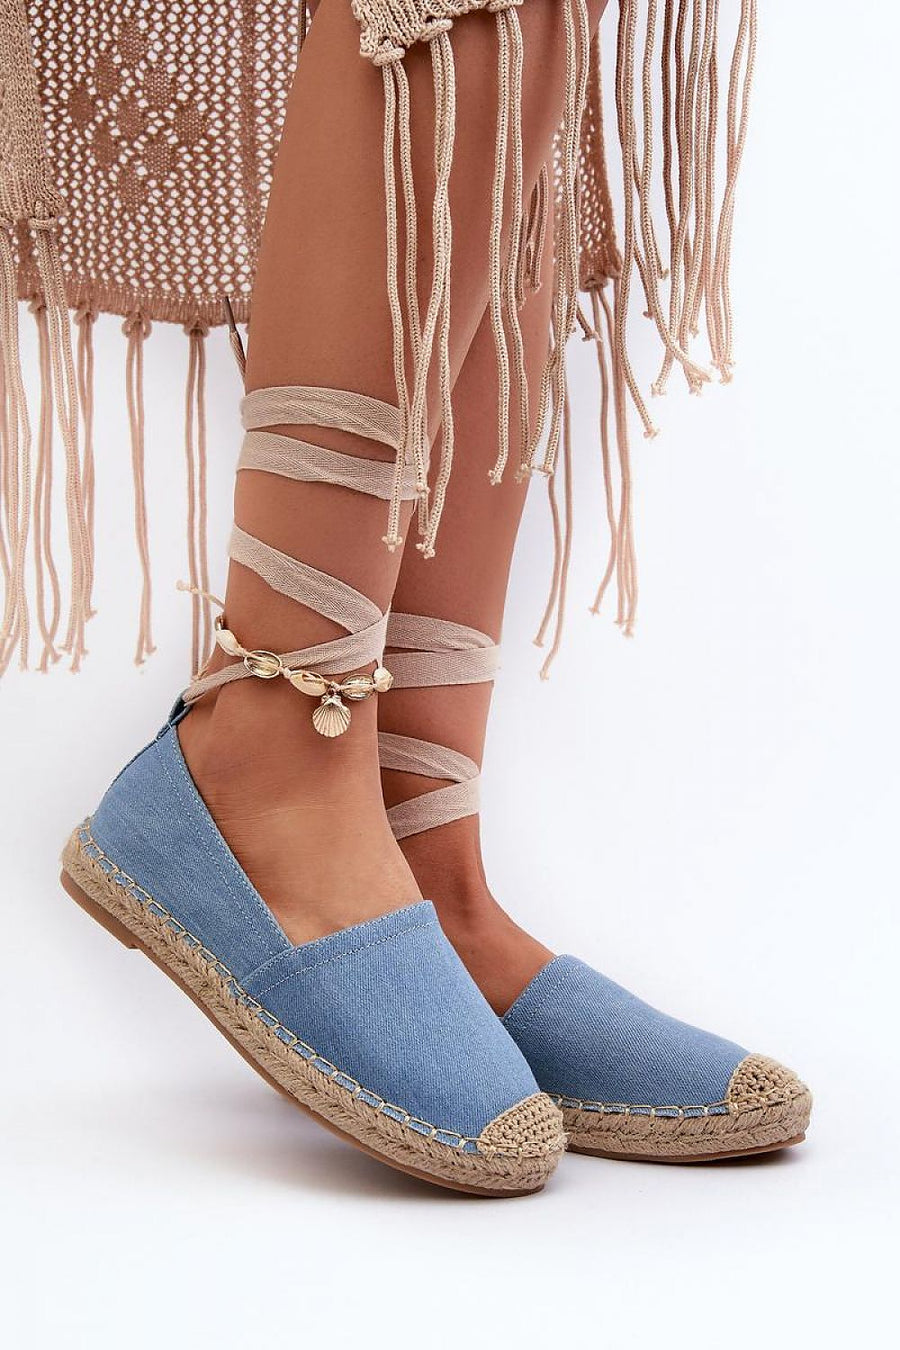 Espadrilles Model 197128 Step in style